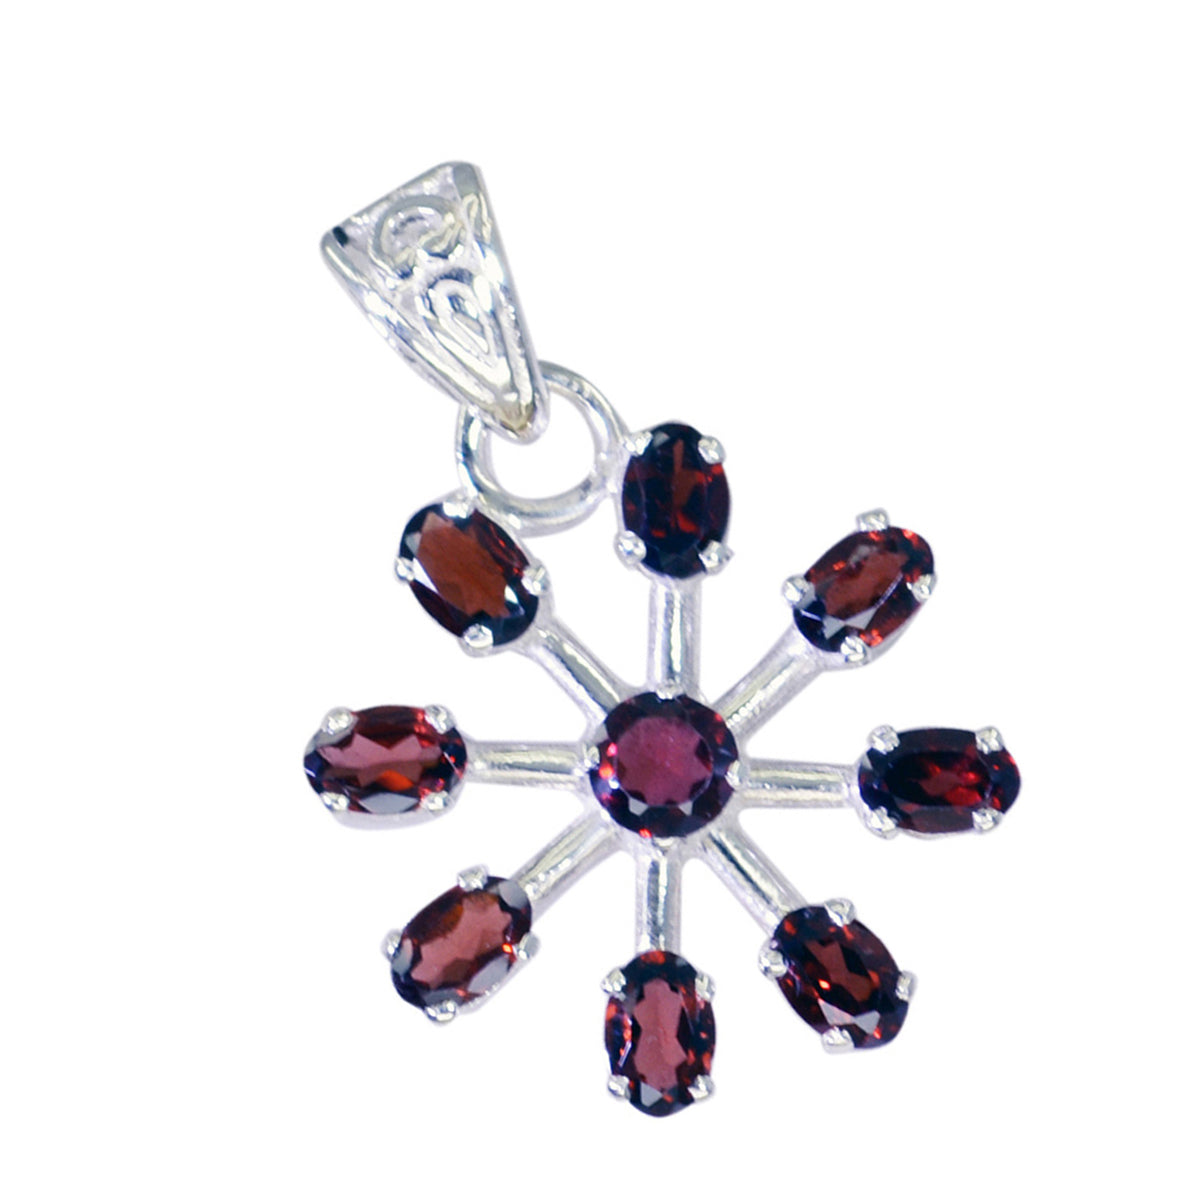 Riyo Comely Gems Multi Faceted Red Garnet Solid Silver Pendant Gift For Easter Sunday